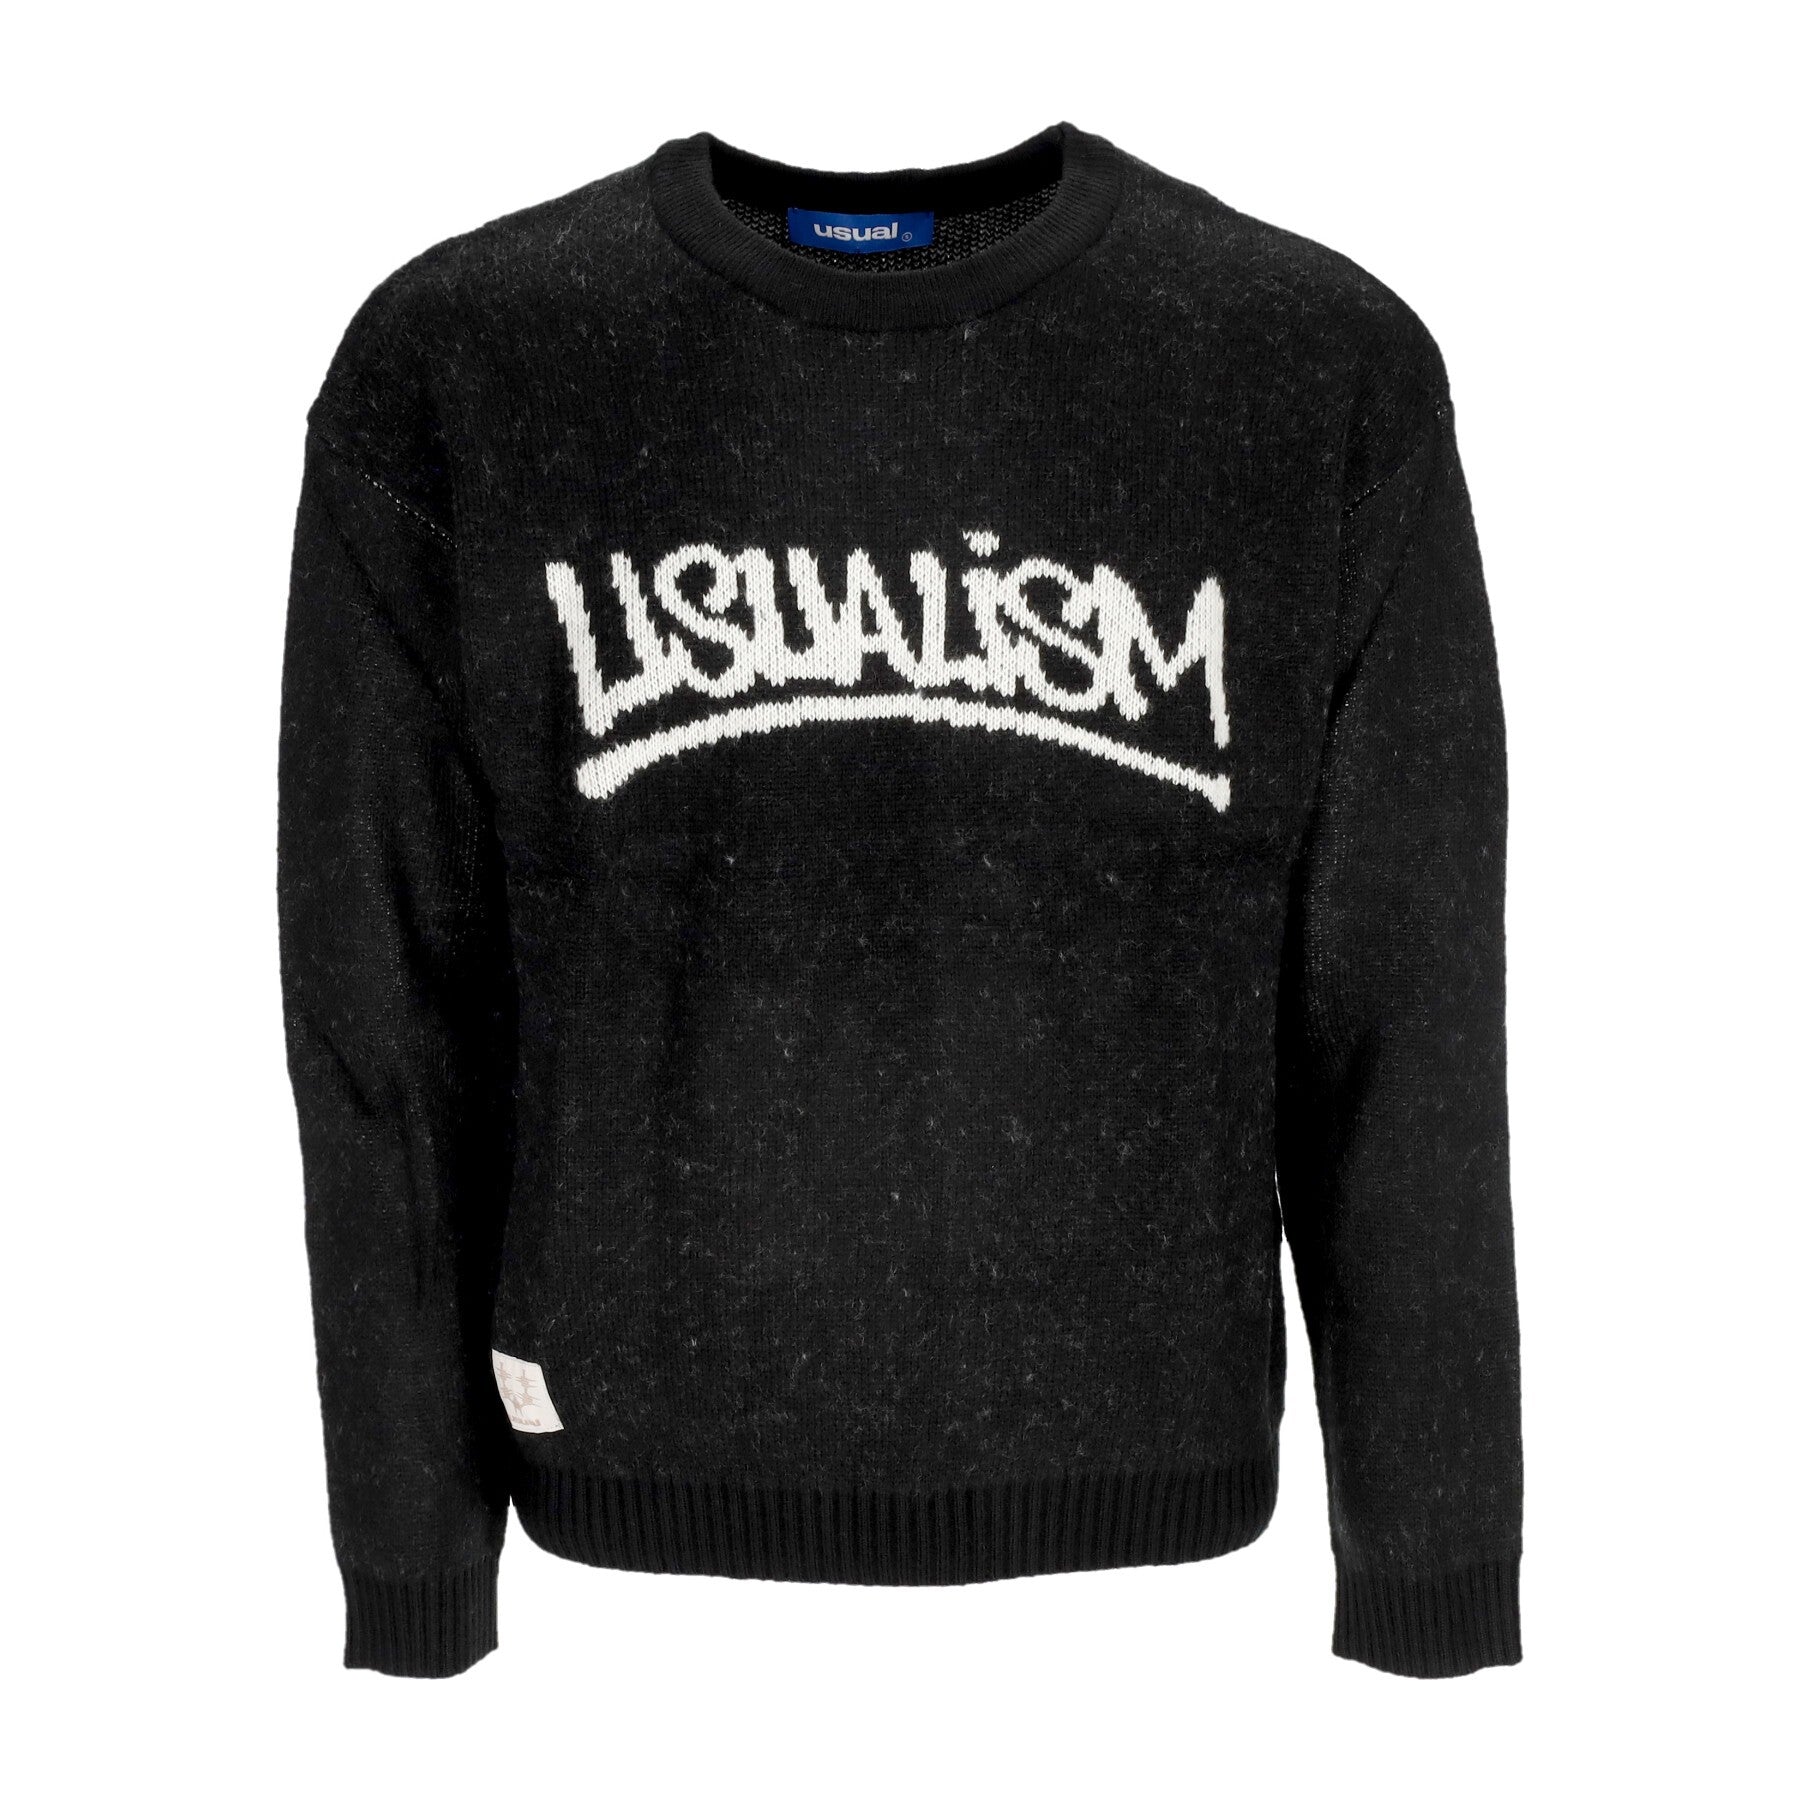 Usual, Maglione Uomo Usualism Sweater, Black